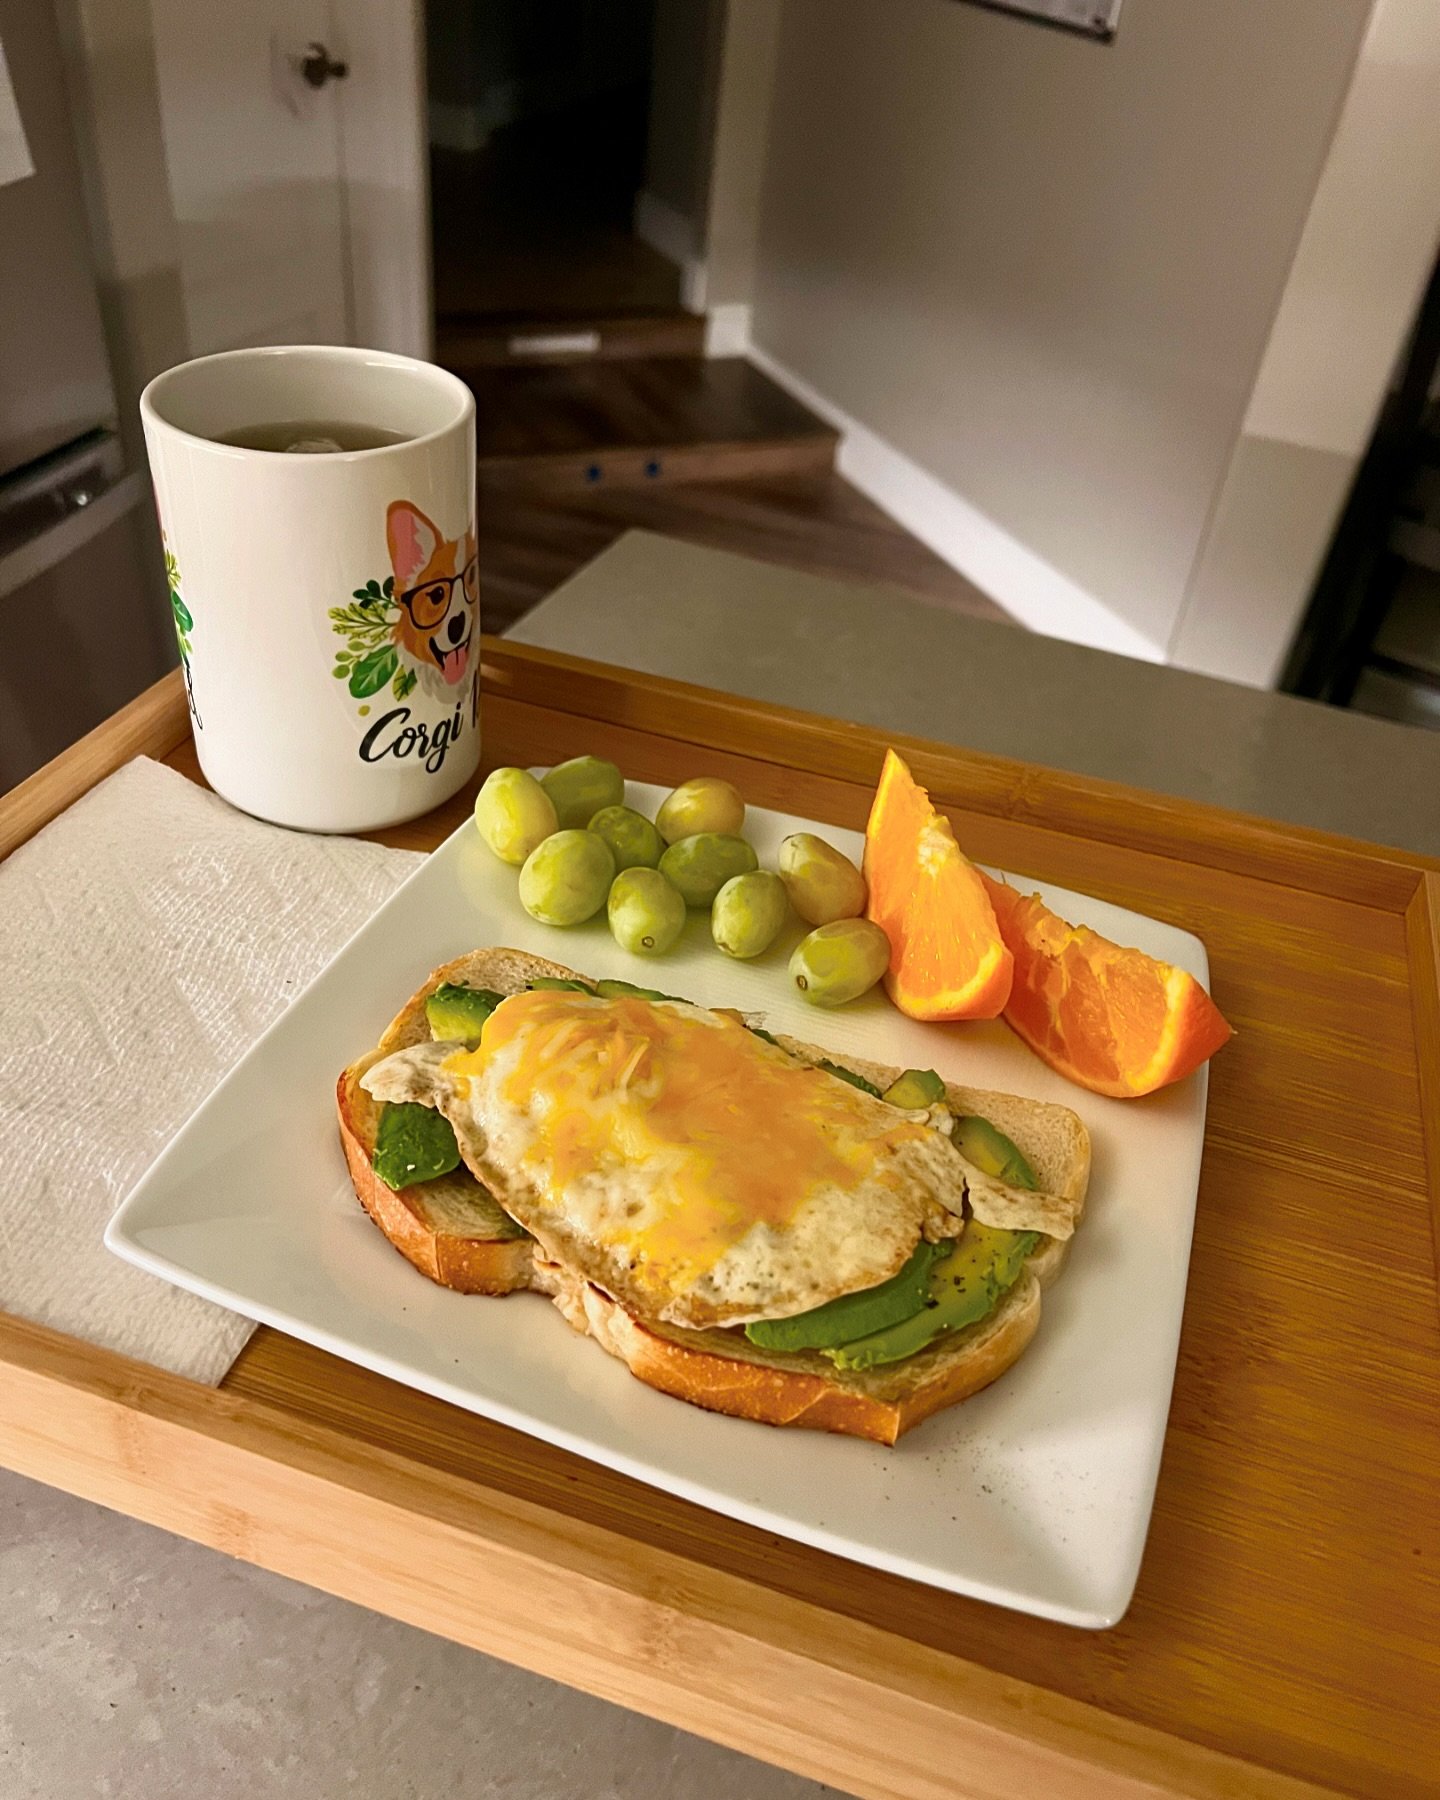 POV: your 10 days postpartum and your doula serves you breakfast in bed while your baby is still sleeping 🍳🥑
.
.
.
#sacramentodoula #postpartumsupport #sacramentoparent #newparents #postpartumcare #sacramentofamilies #doulalife #postpartumrecovery 